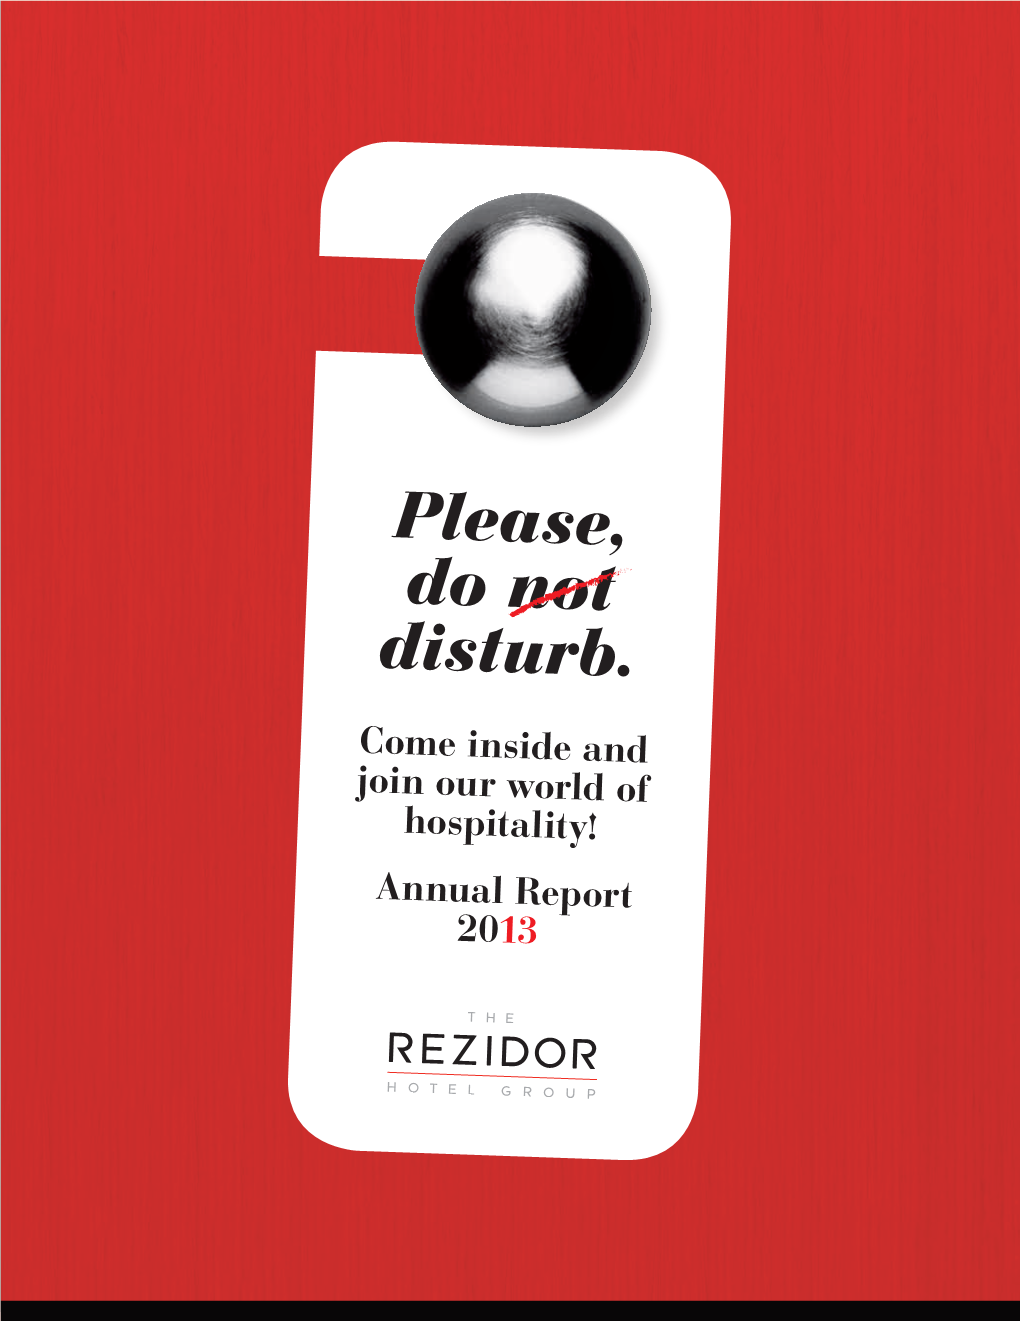 Rezidor Hotel Group Annual Report, 2013